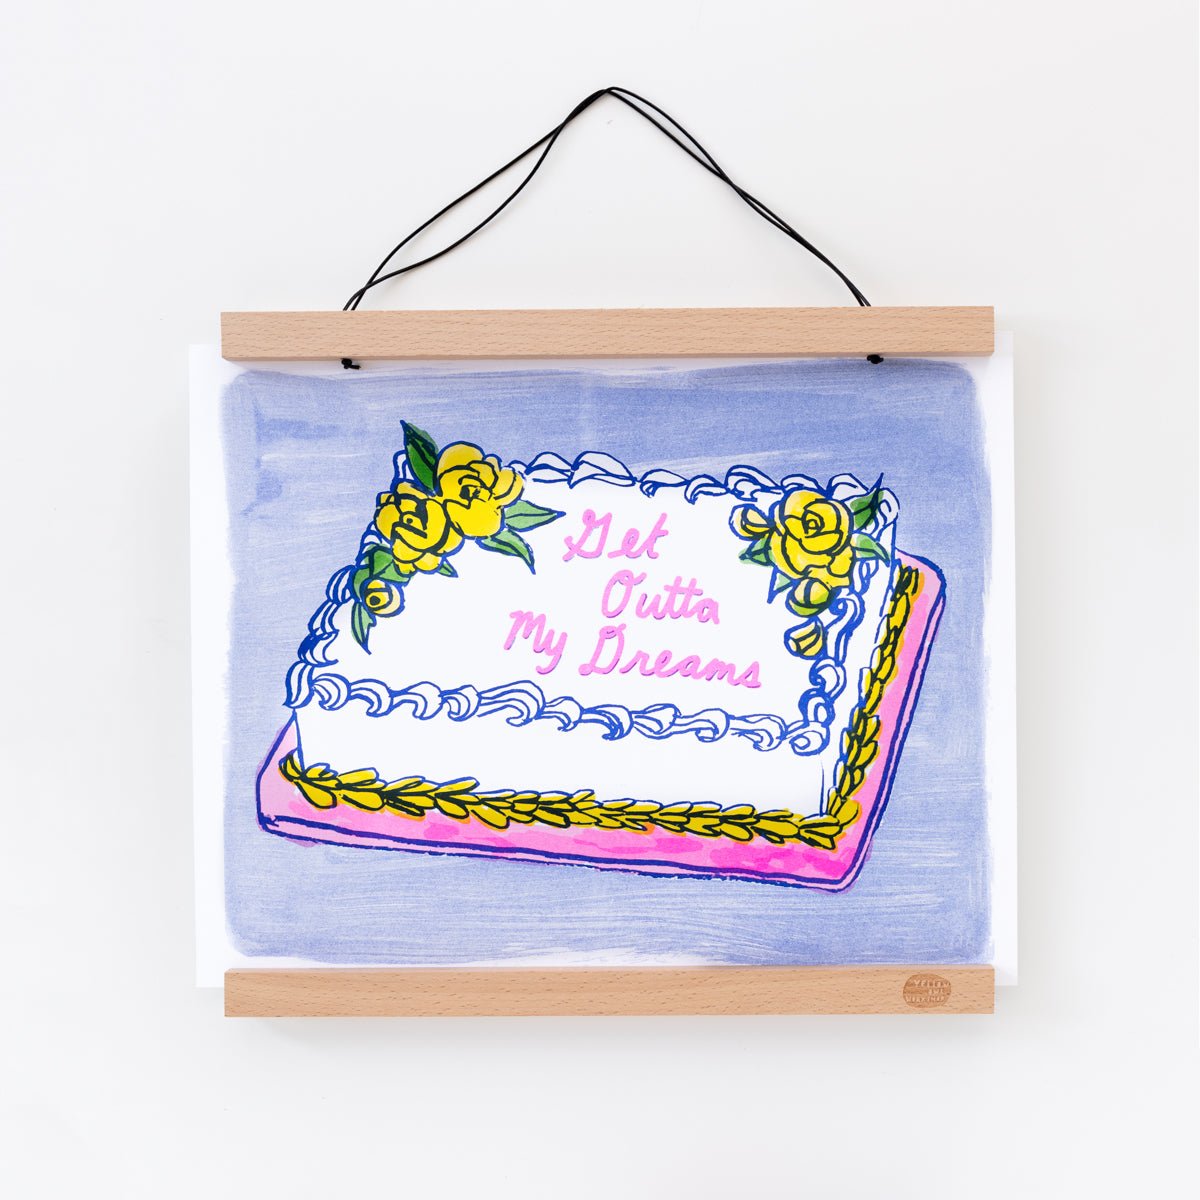 Get Outta My Dreams Cake - Risograph Print - Yellow Owl Workshop